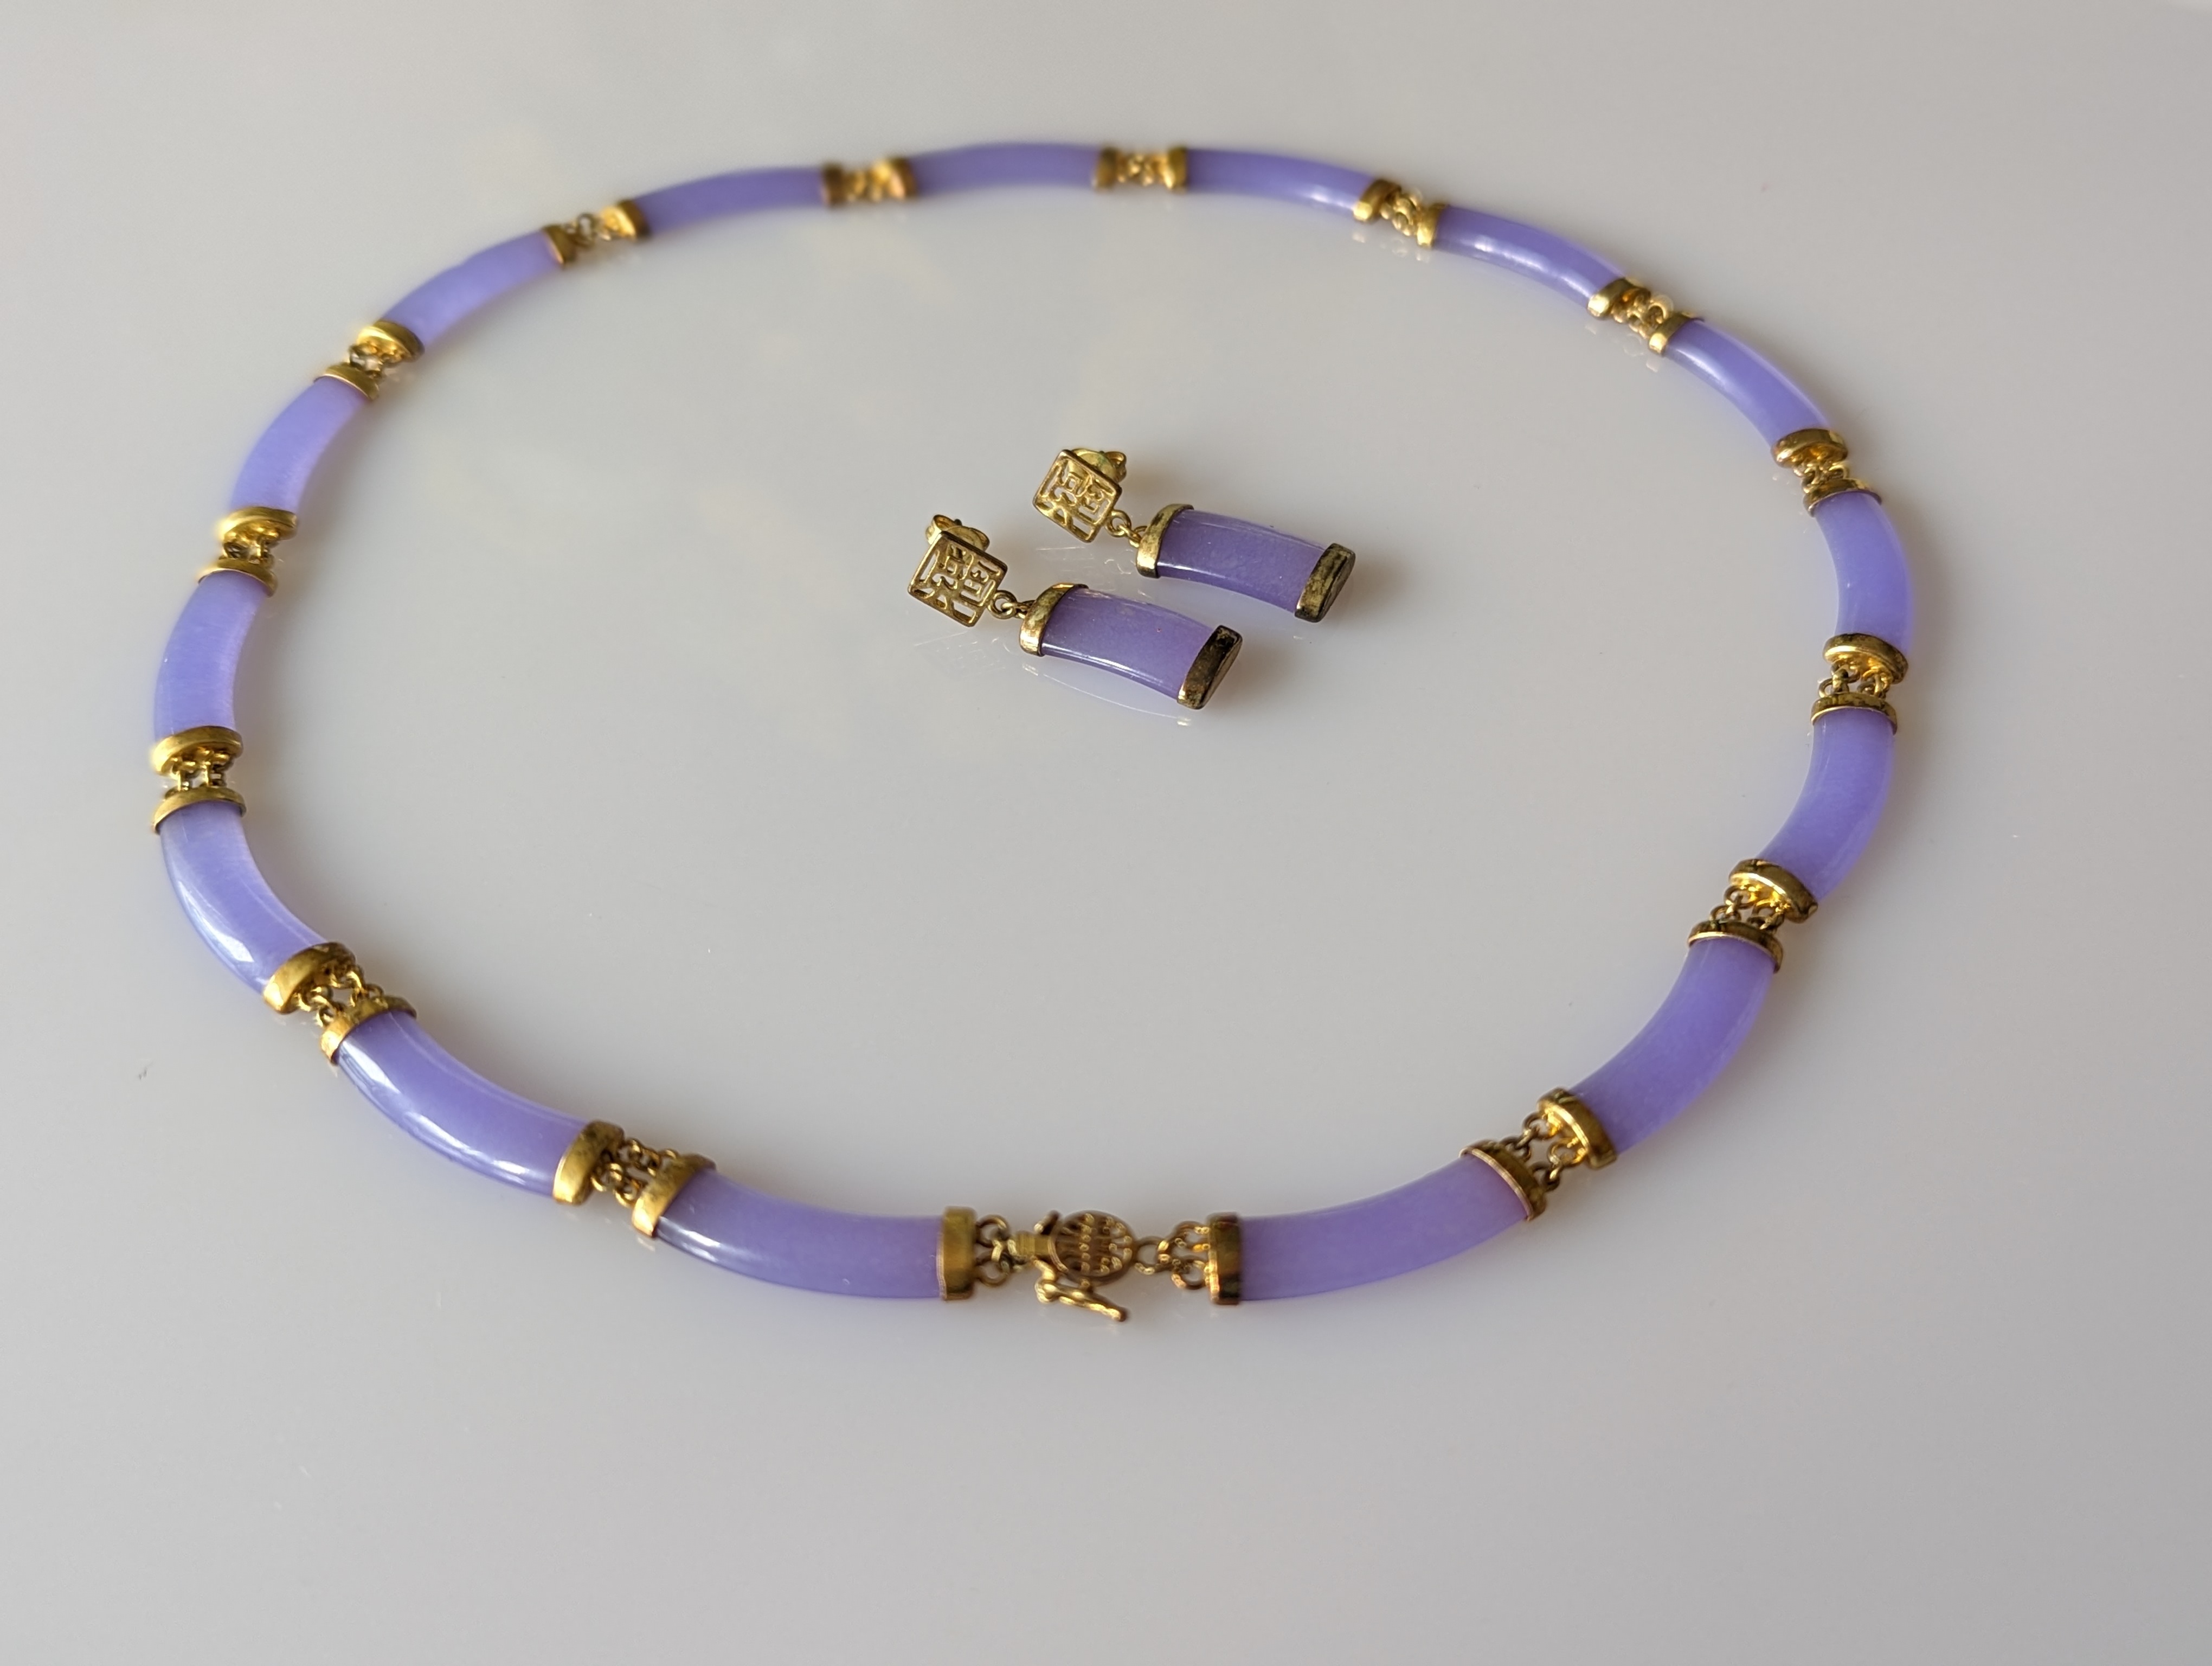 A dyed purple jade panel necklace, with 15 curbed panels and gold coloured chain links